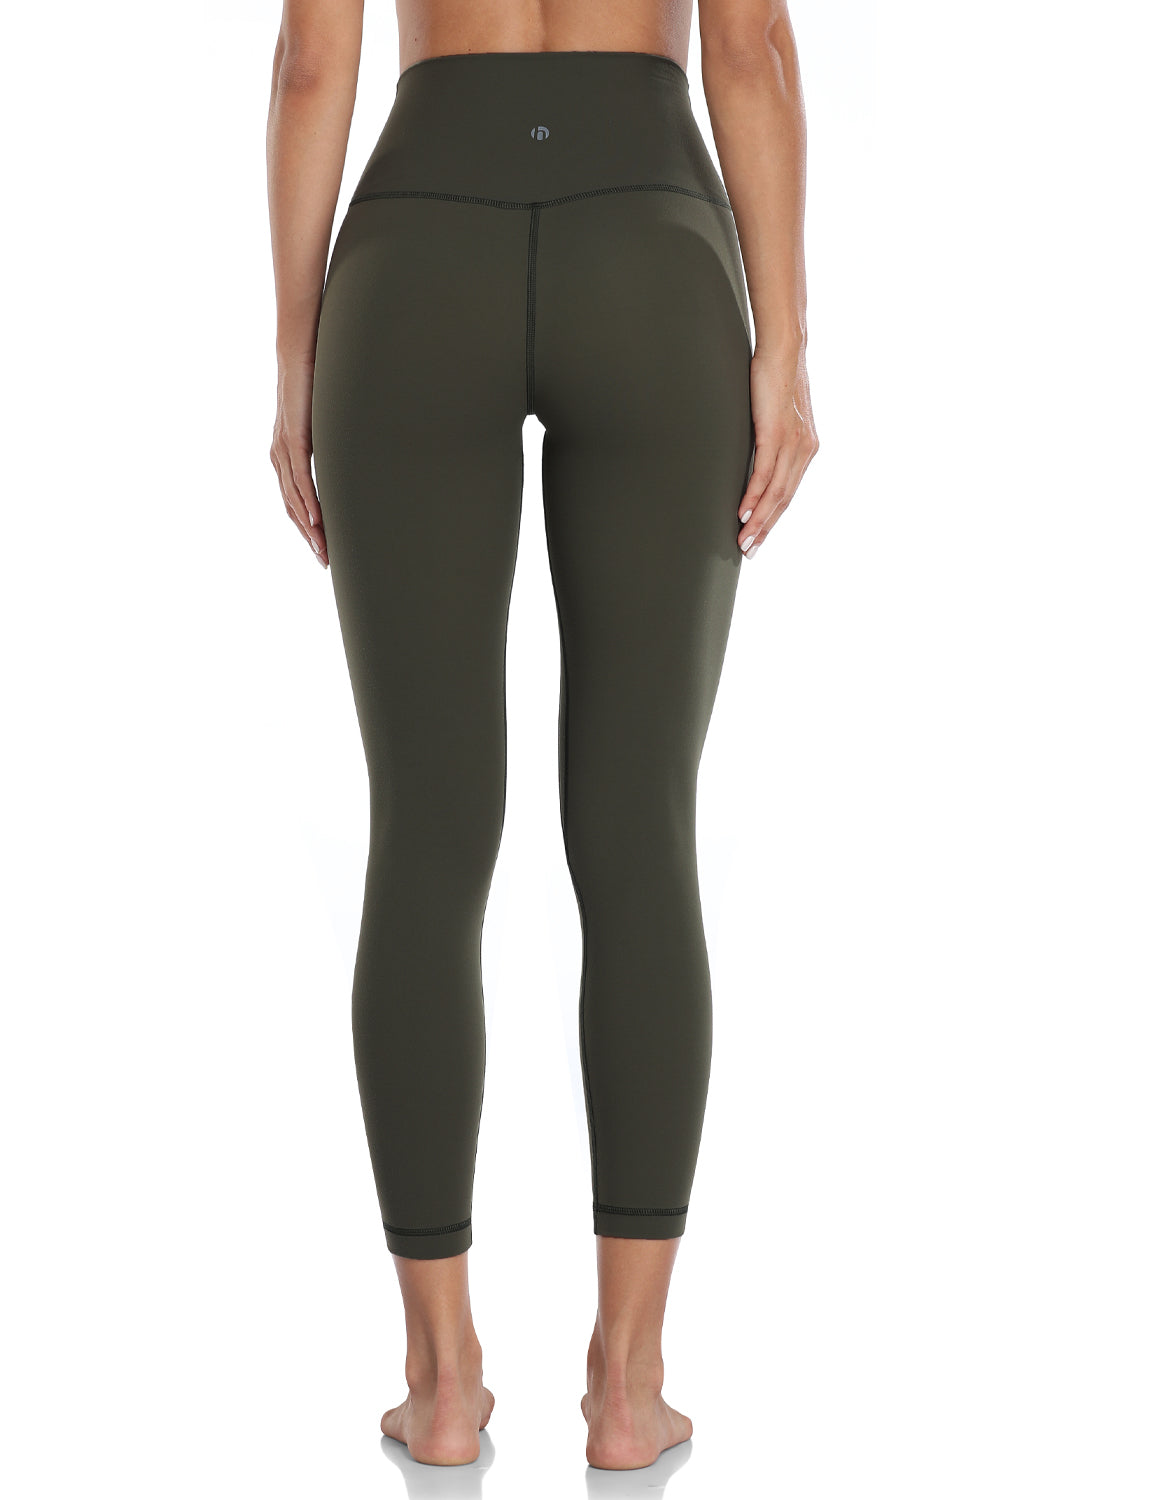  Customer reviews: HeyNuts Hawthorn Athletic High Waisted Yoga  Leggings for Women, Buttery Soft Workout Pants Compression 7/8 Leggings  with Inner Pockets Sage Grey_25'' XS(0/2)